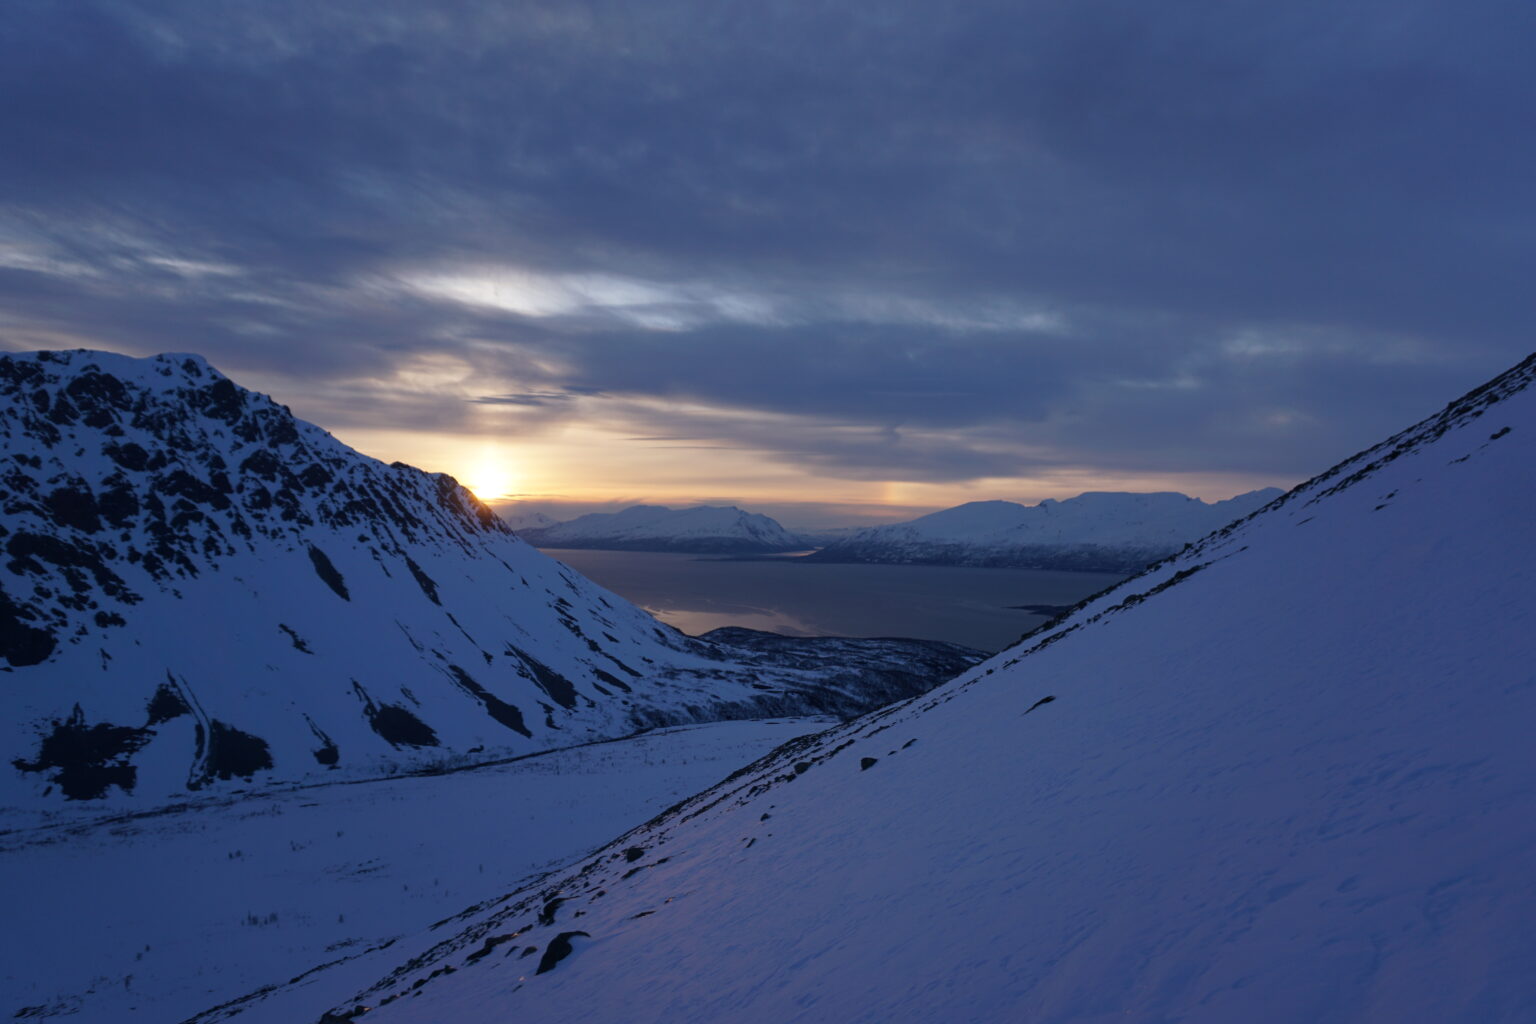 Watching the sun rise as we climbed Fastdaltinden on the Northern Loop